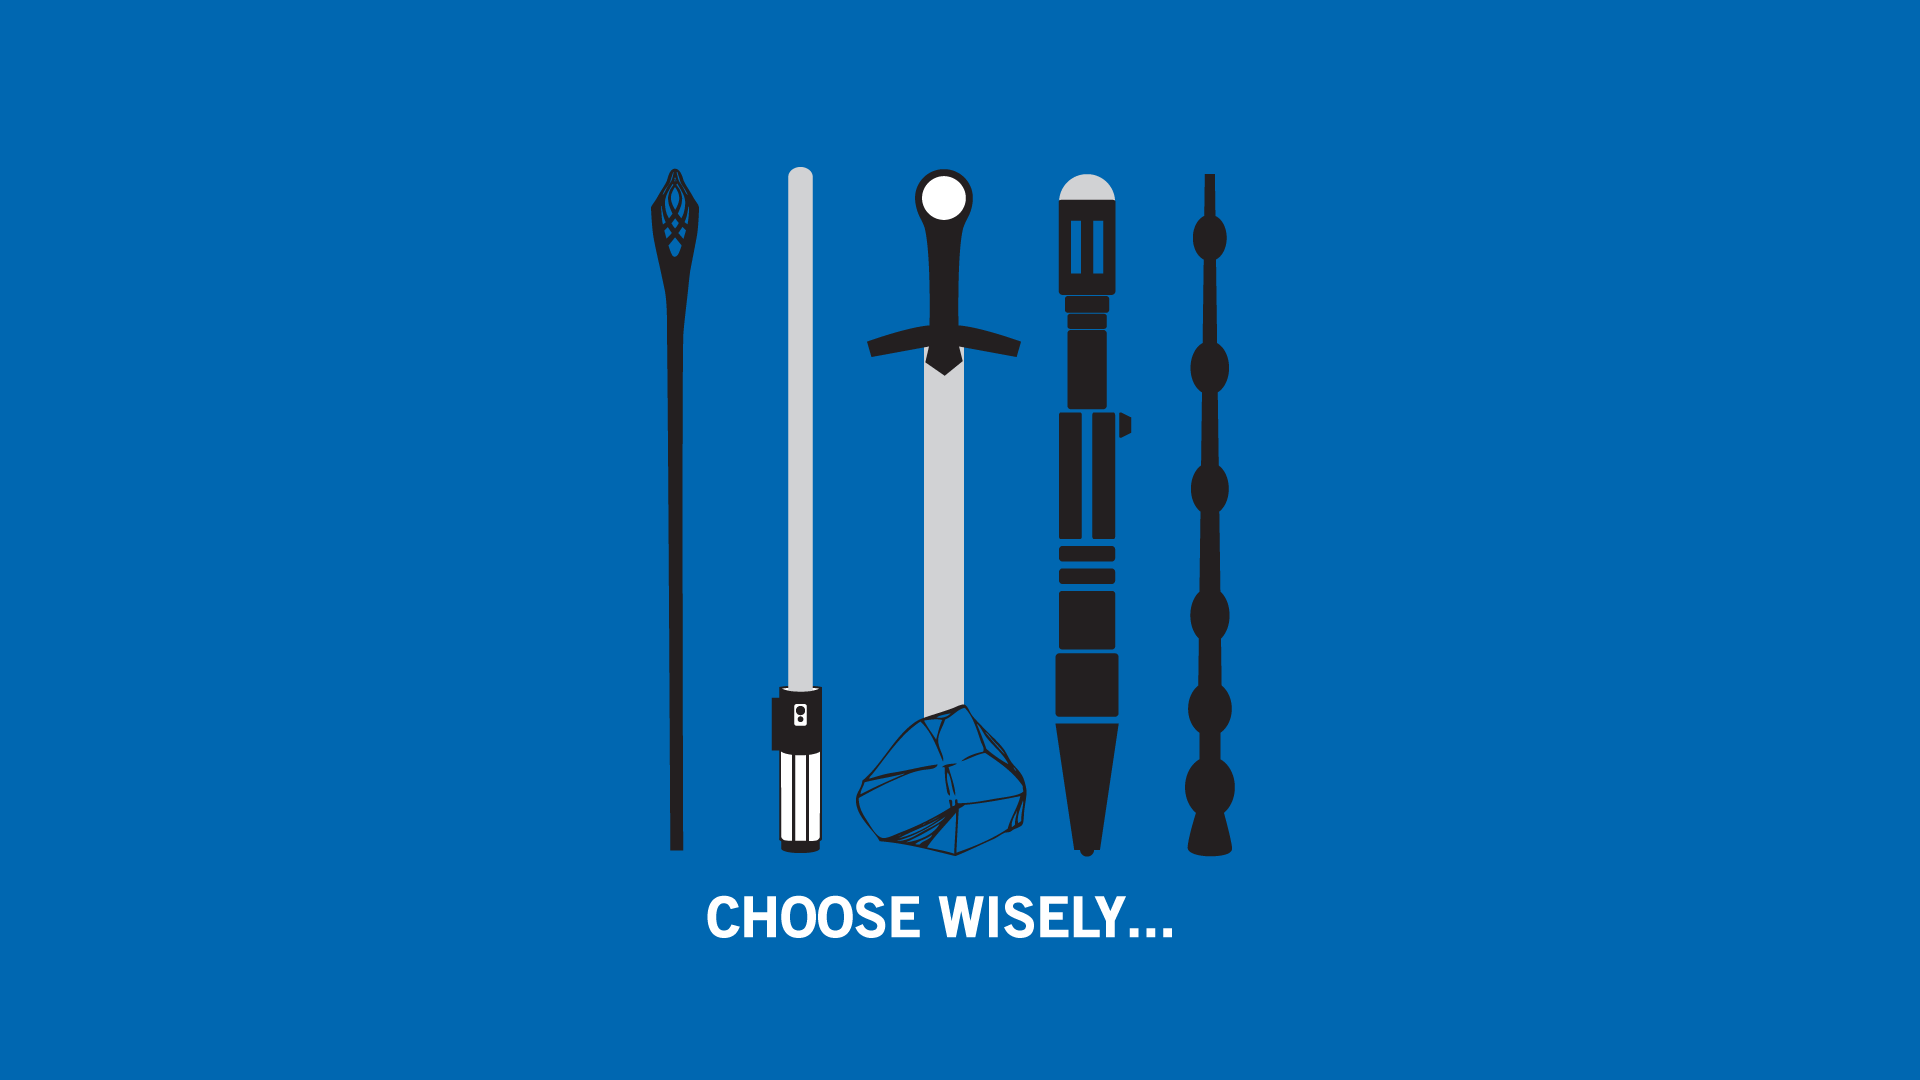 1920x1080 the lord of the rings star wars excalibur harry potter doctor who weapon minimalism blue background humor wallpaper JPG 80 kB Gallery HD Wallpaper